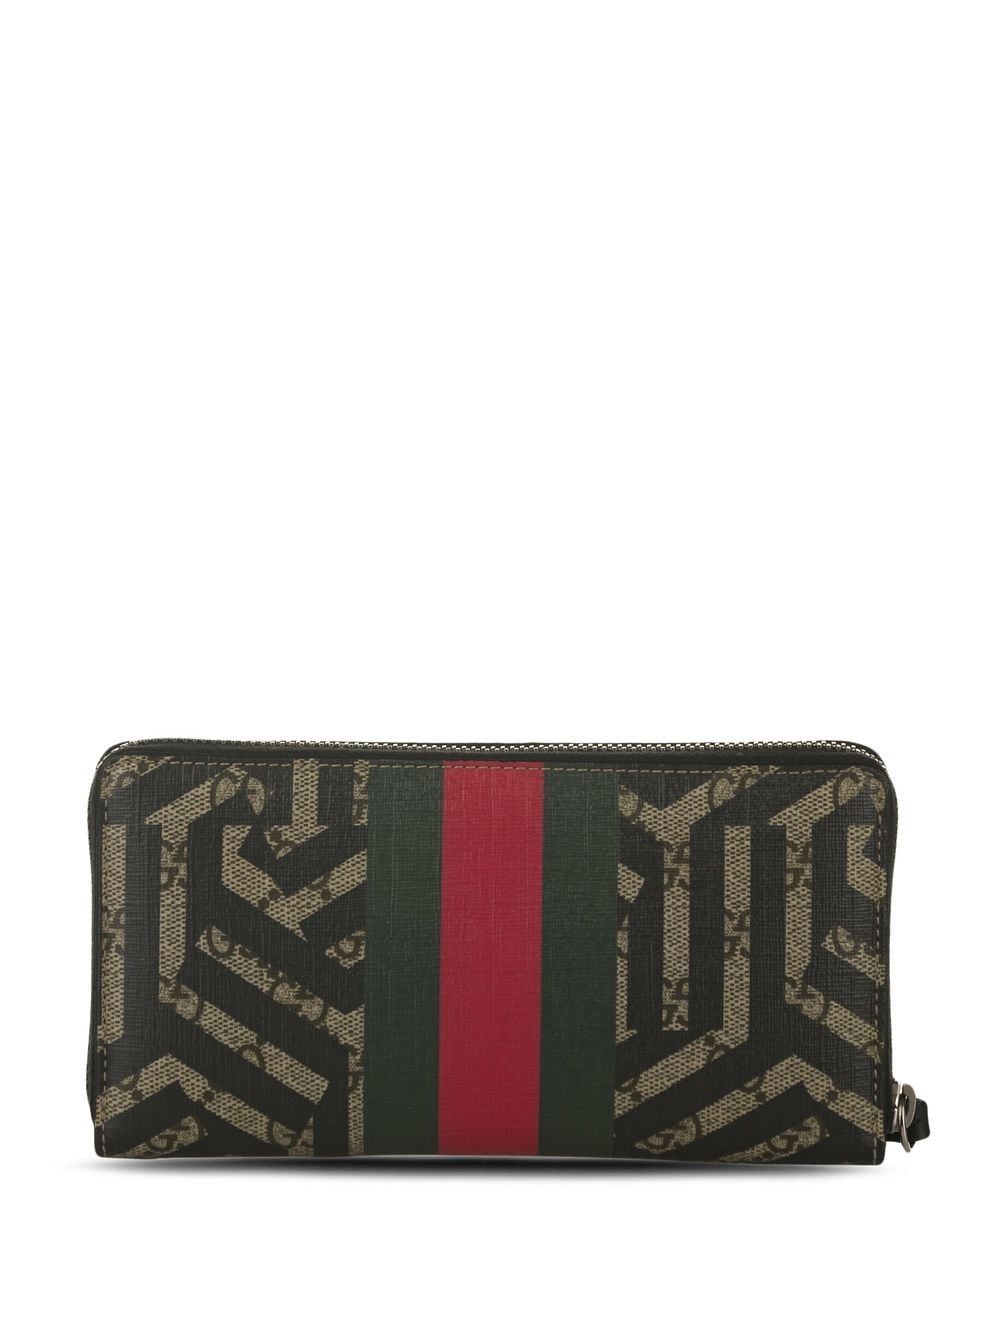 Gucci Embroidered Bee Billfold Wallet In Black, ModeSens